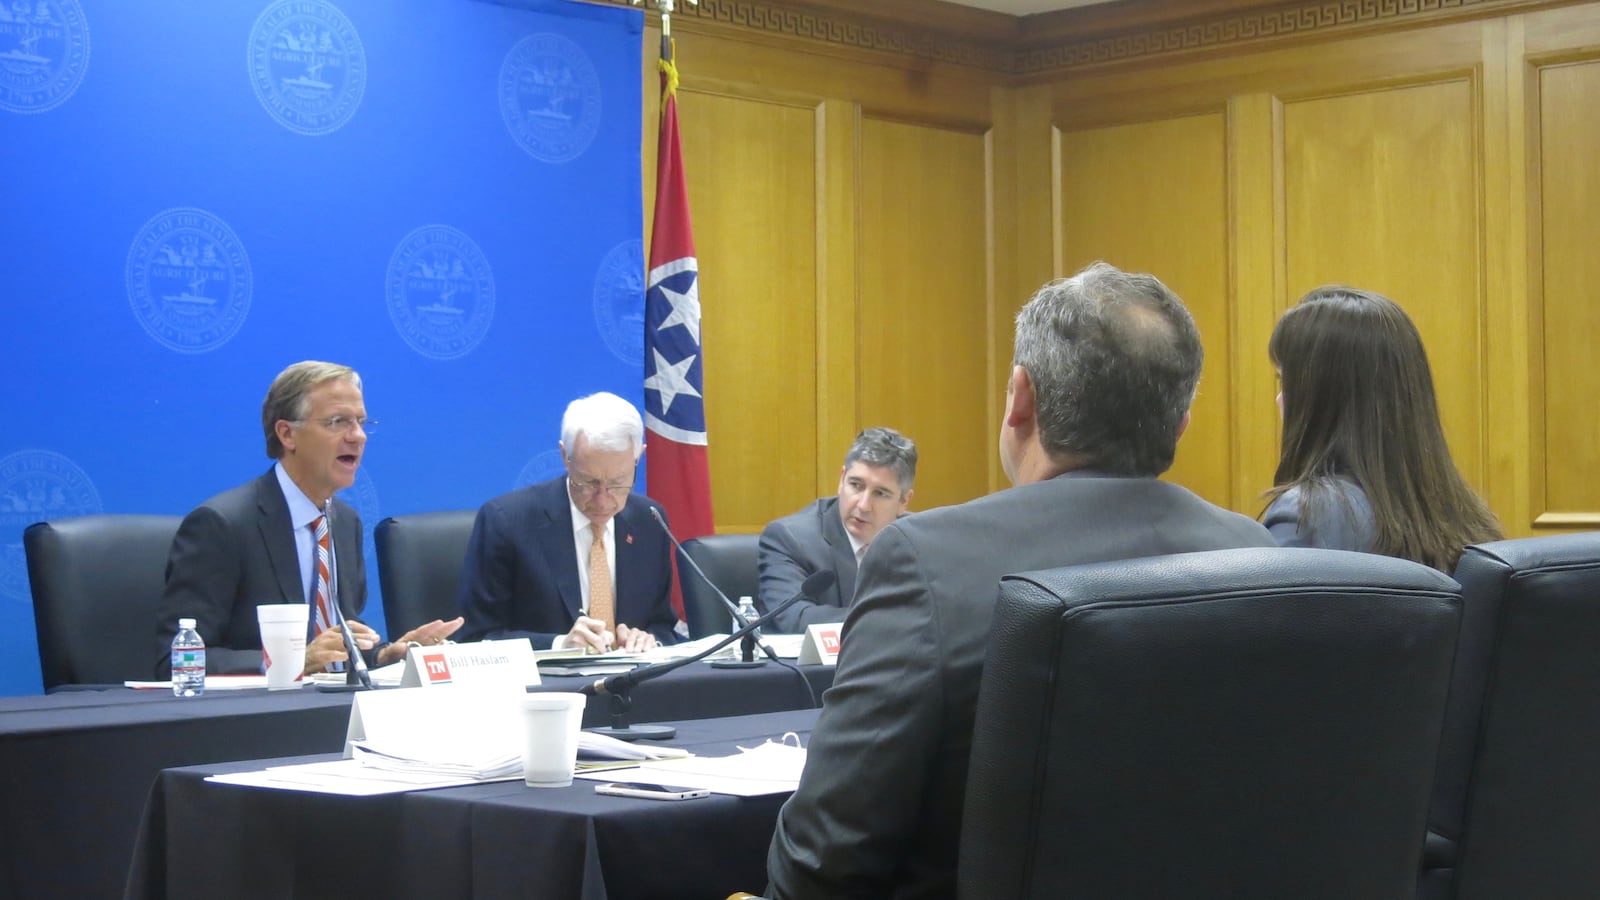 Gov. Bill Haslam asks questions of leaders with the State Department of Education during budget hearings on Tuesday.